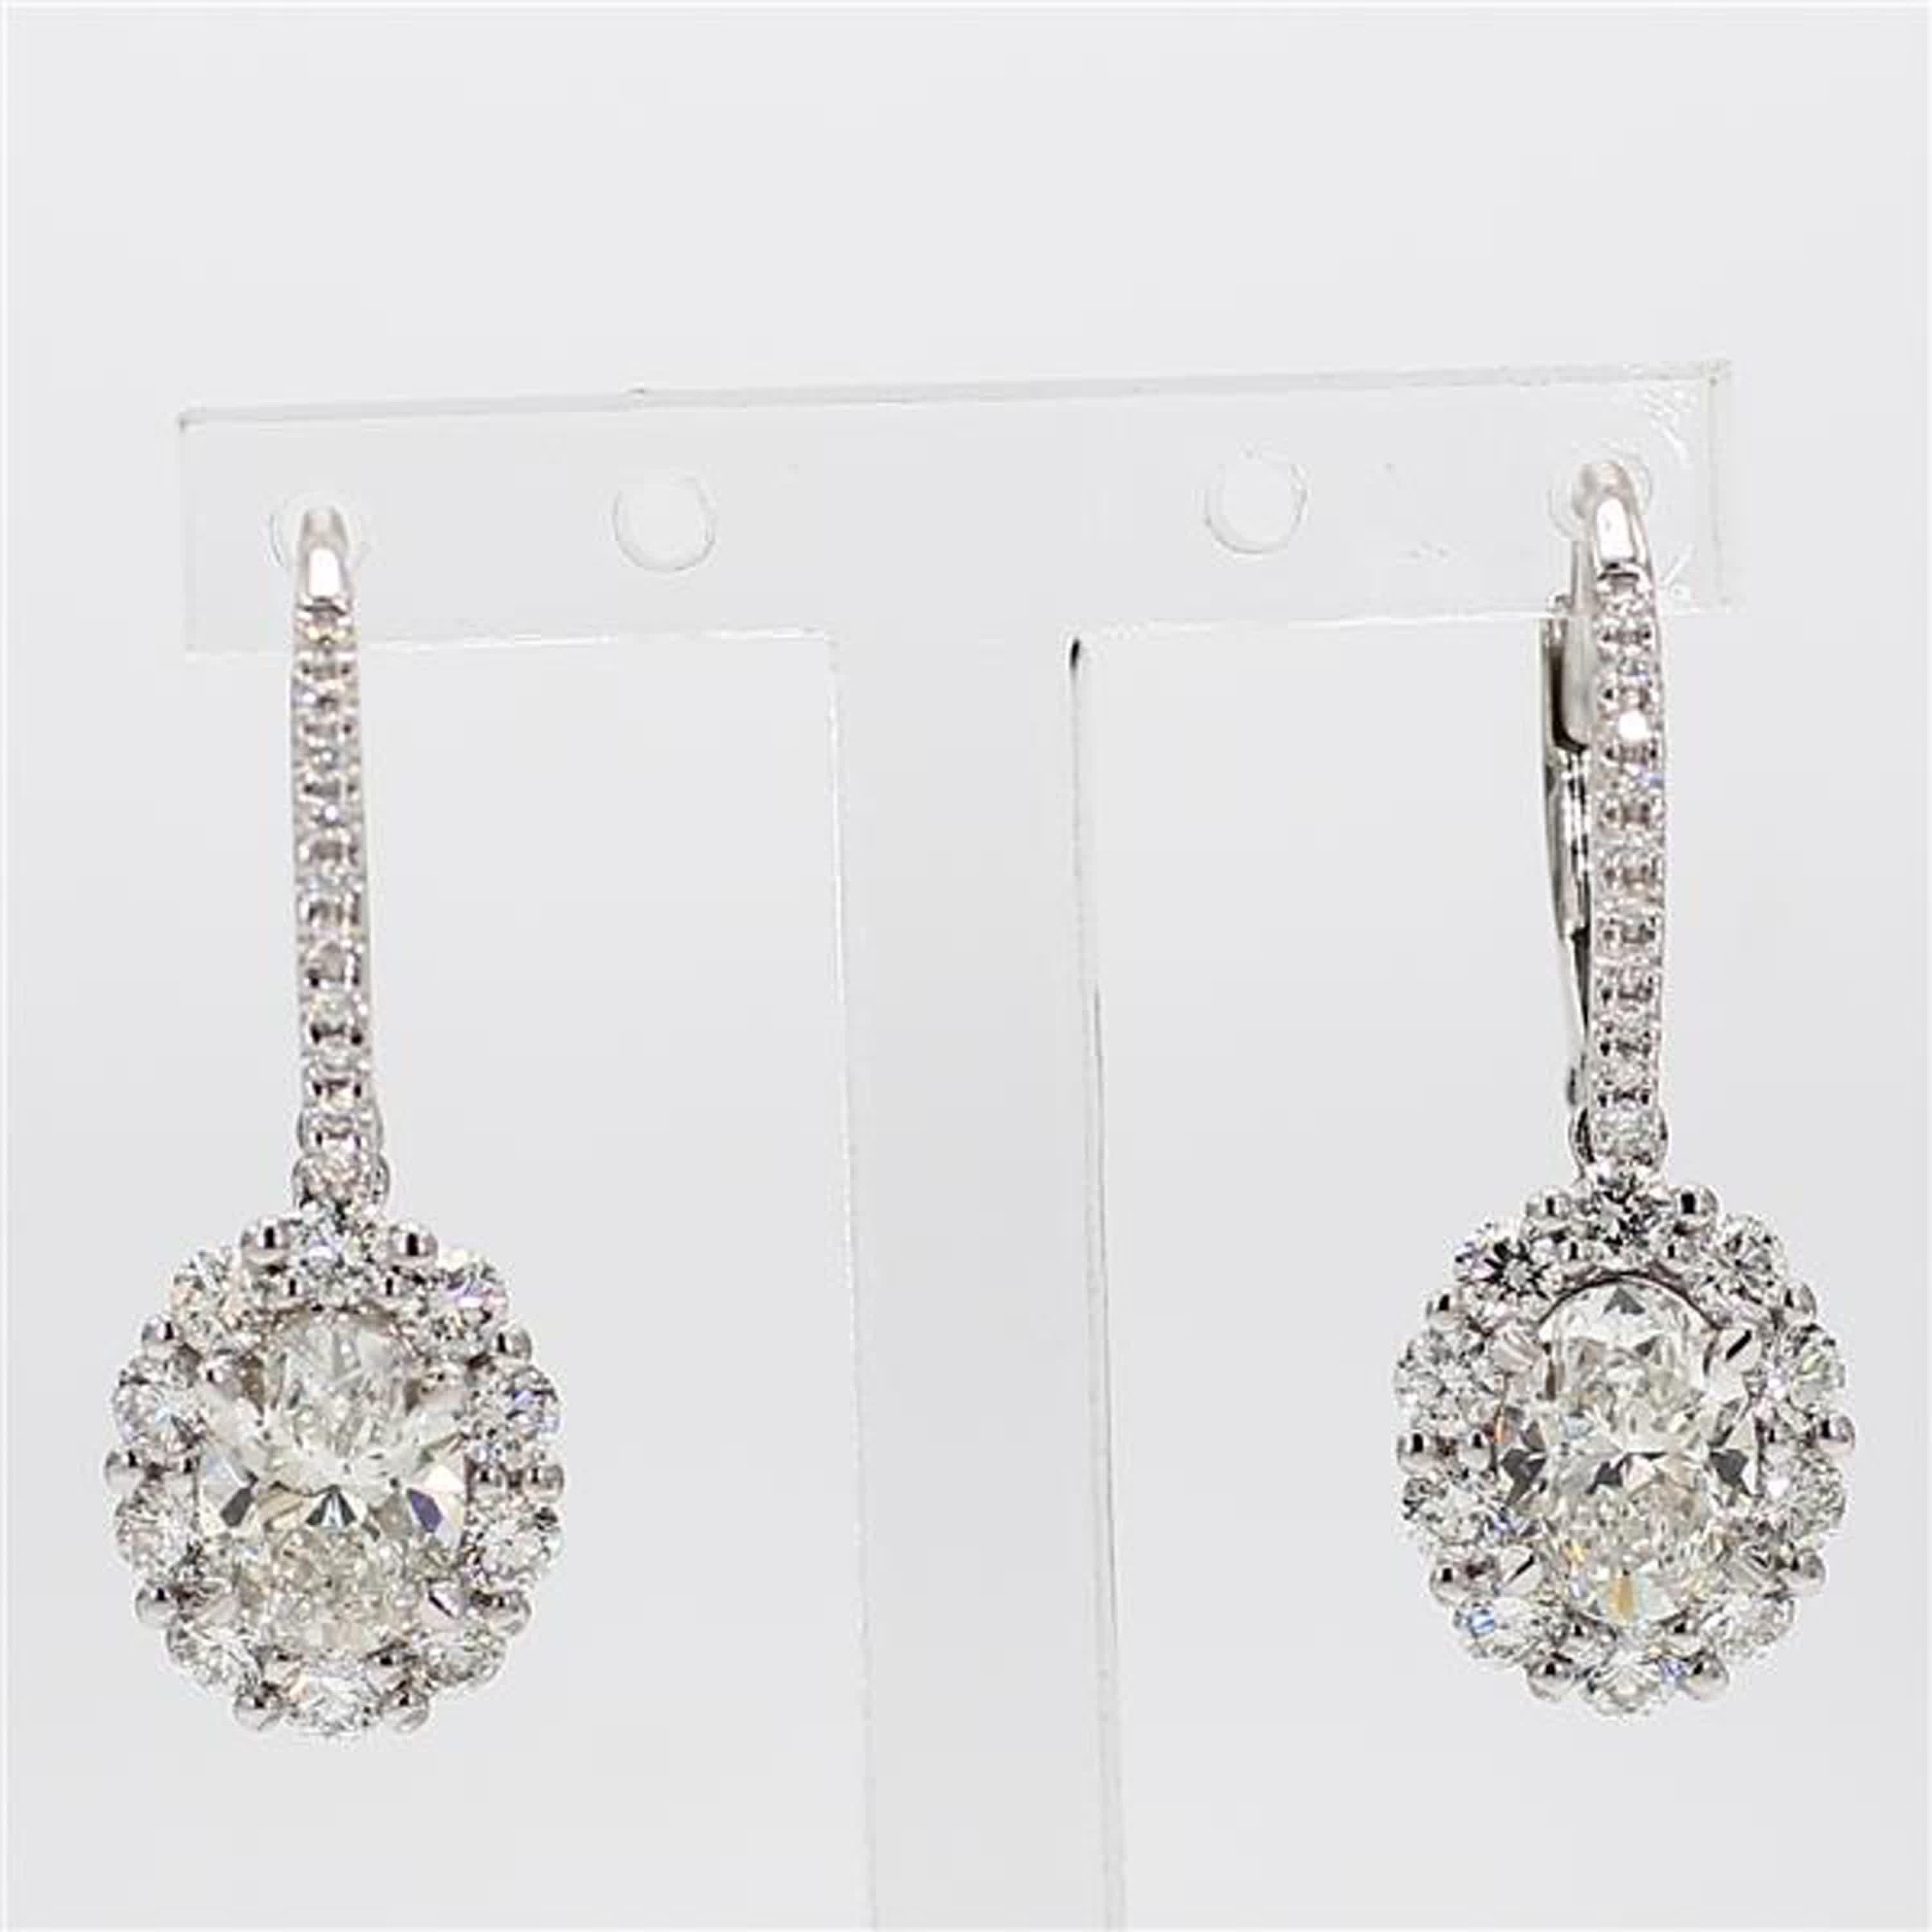 RareGemWorld's classic diamond earrings. Mounted in a beautiful 18K White Gold setting with natural oval cut white diamonds surrounded by natural round cut white diamonds. These earrings are guaranteed to impress and enhance your personal